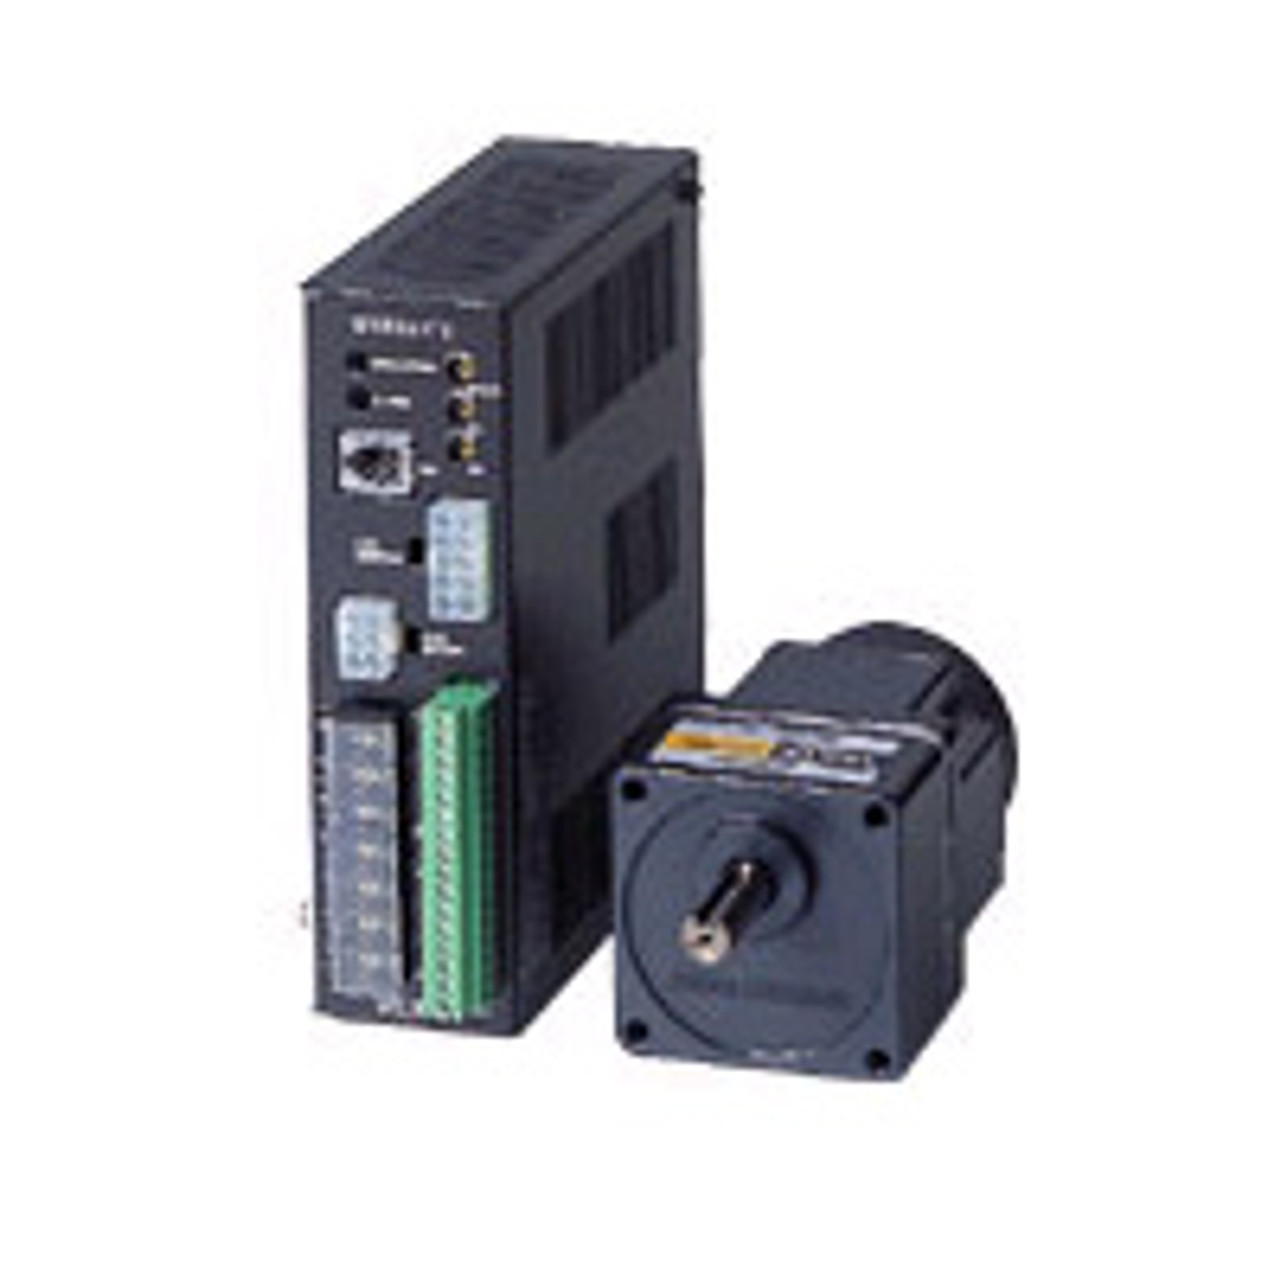 BX230A-10 - Product Image